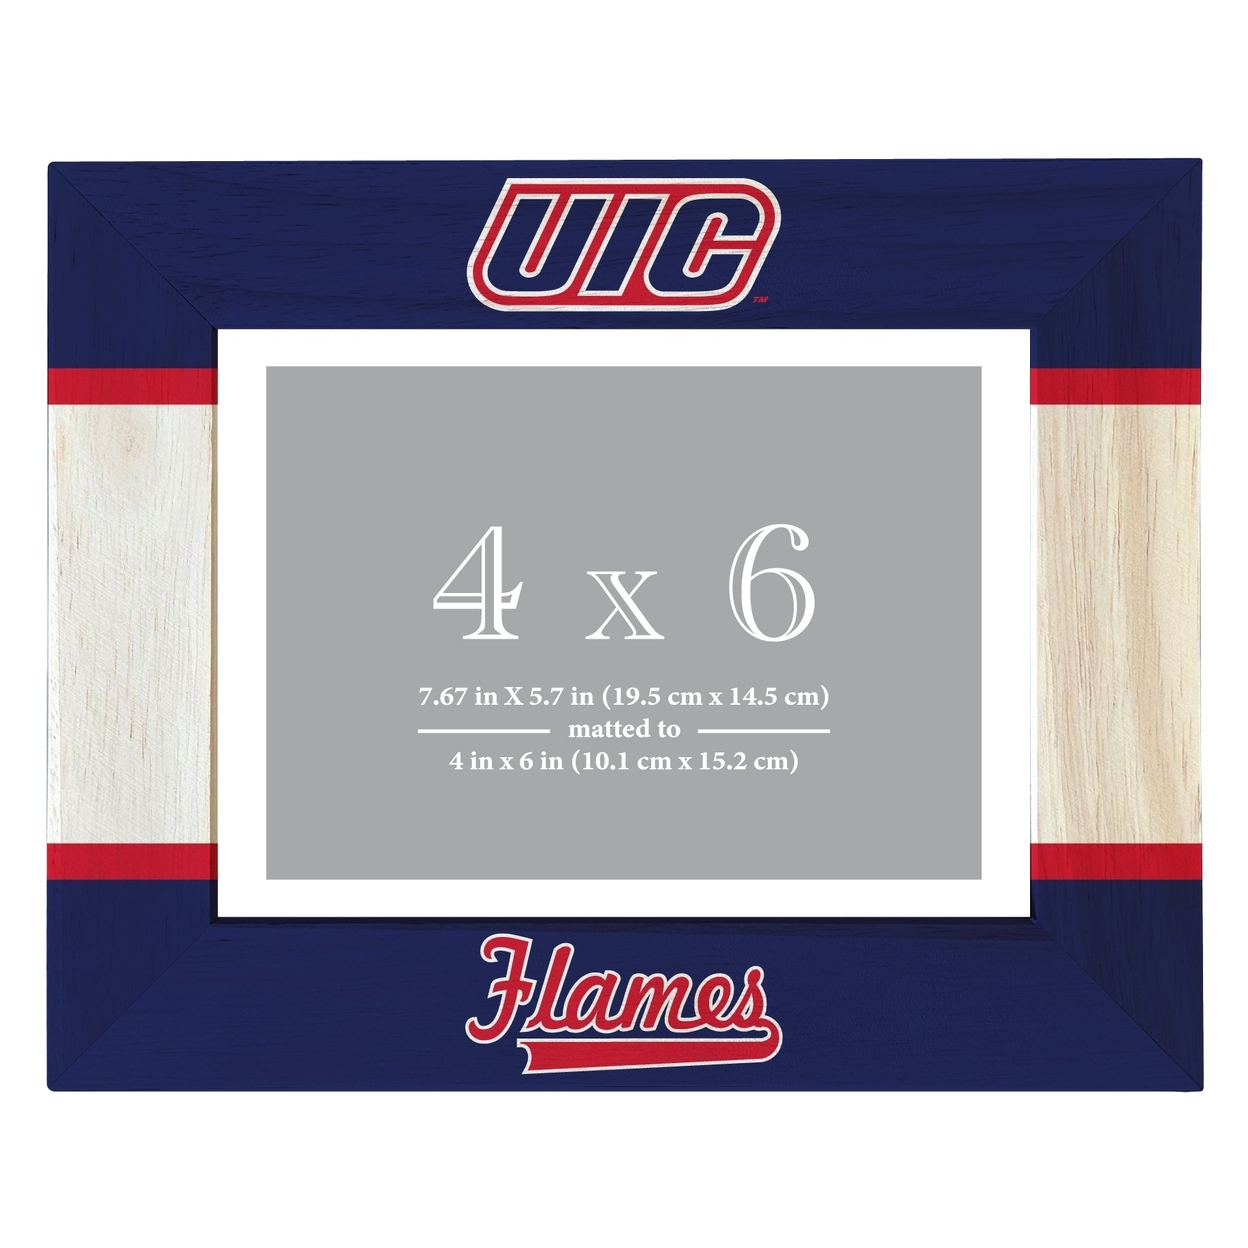 University Of Illinois At Chicago Wooden Photo Frame Matted To 4 X 6 Inch - Printed